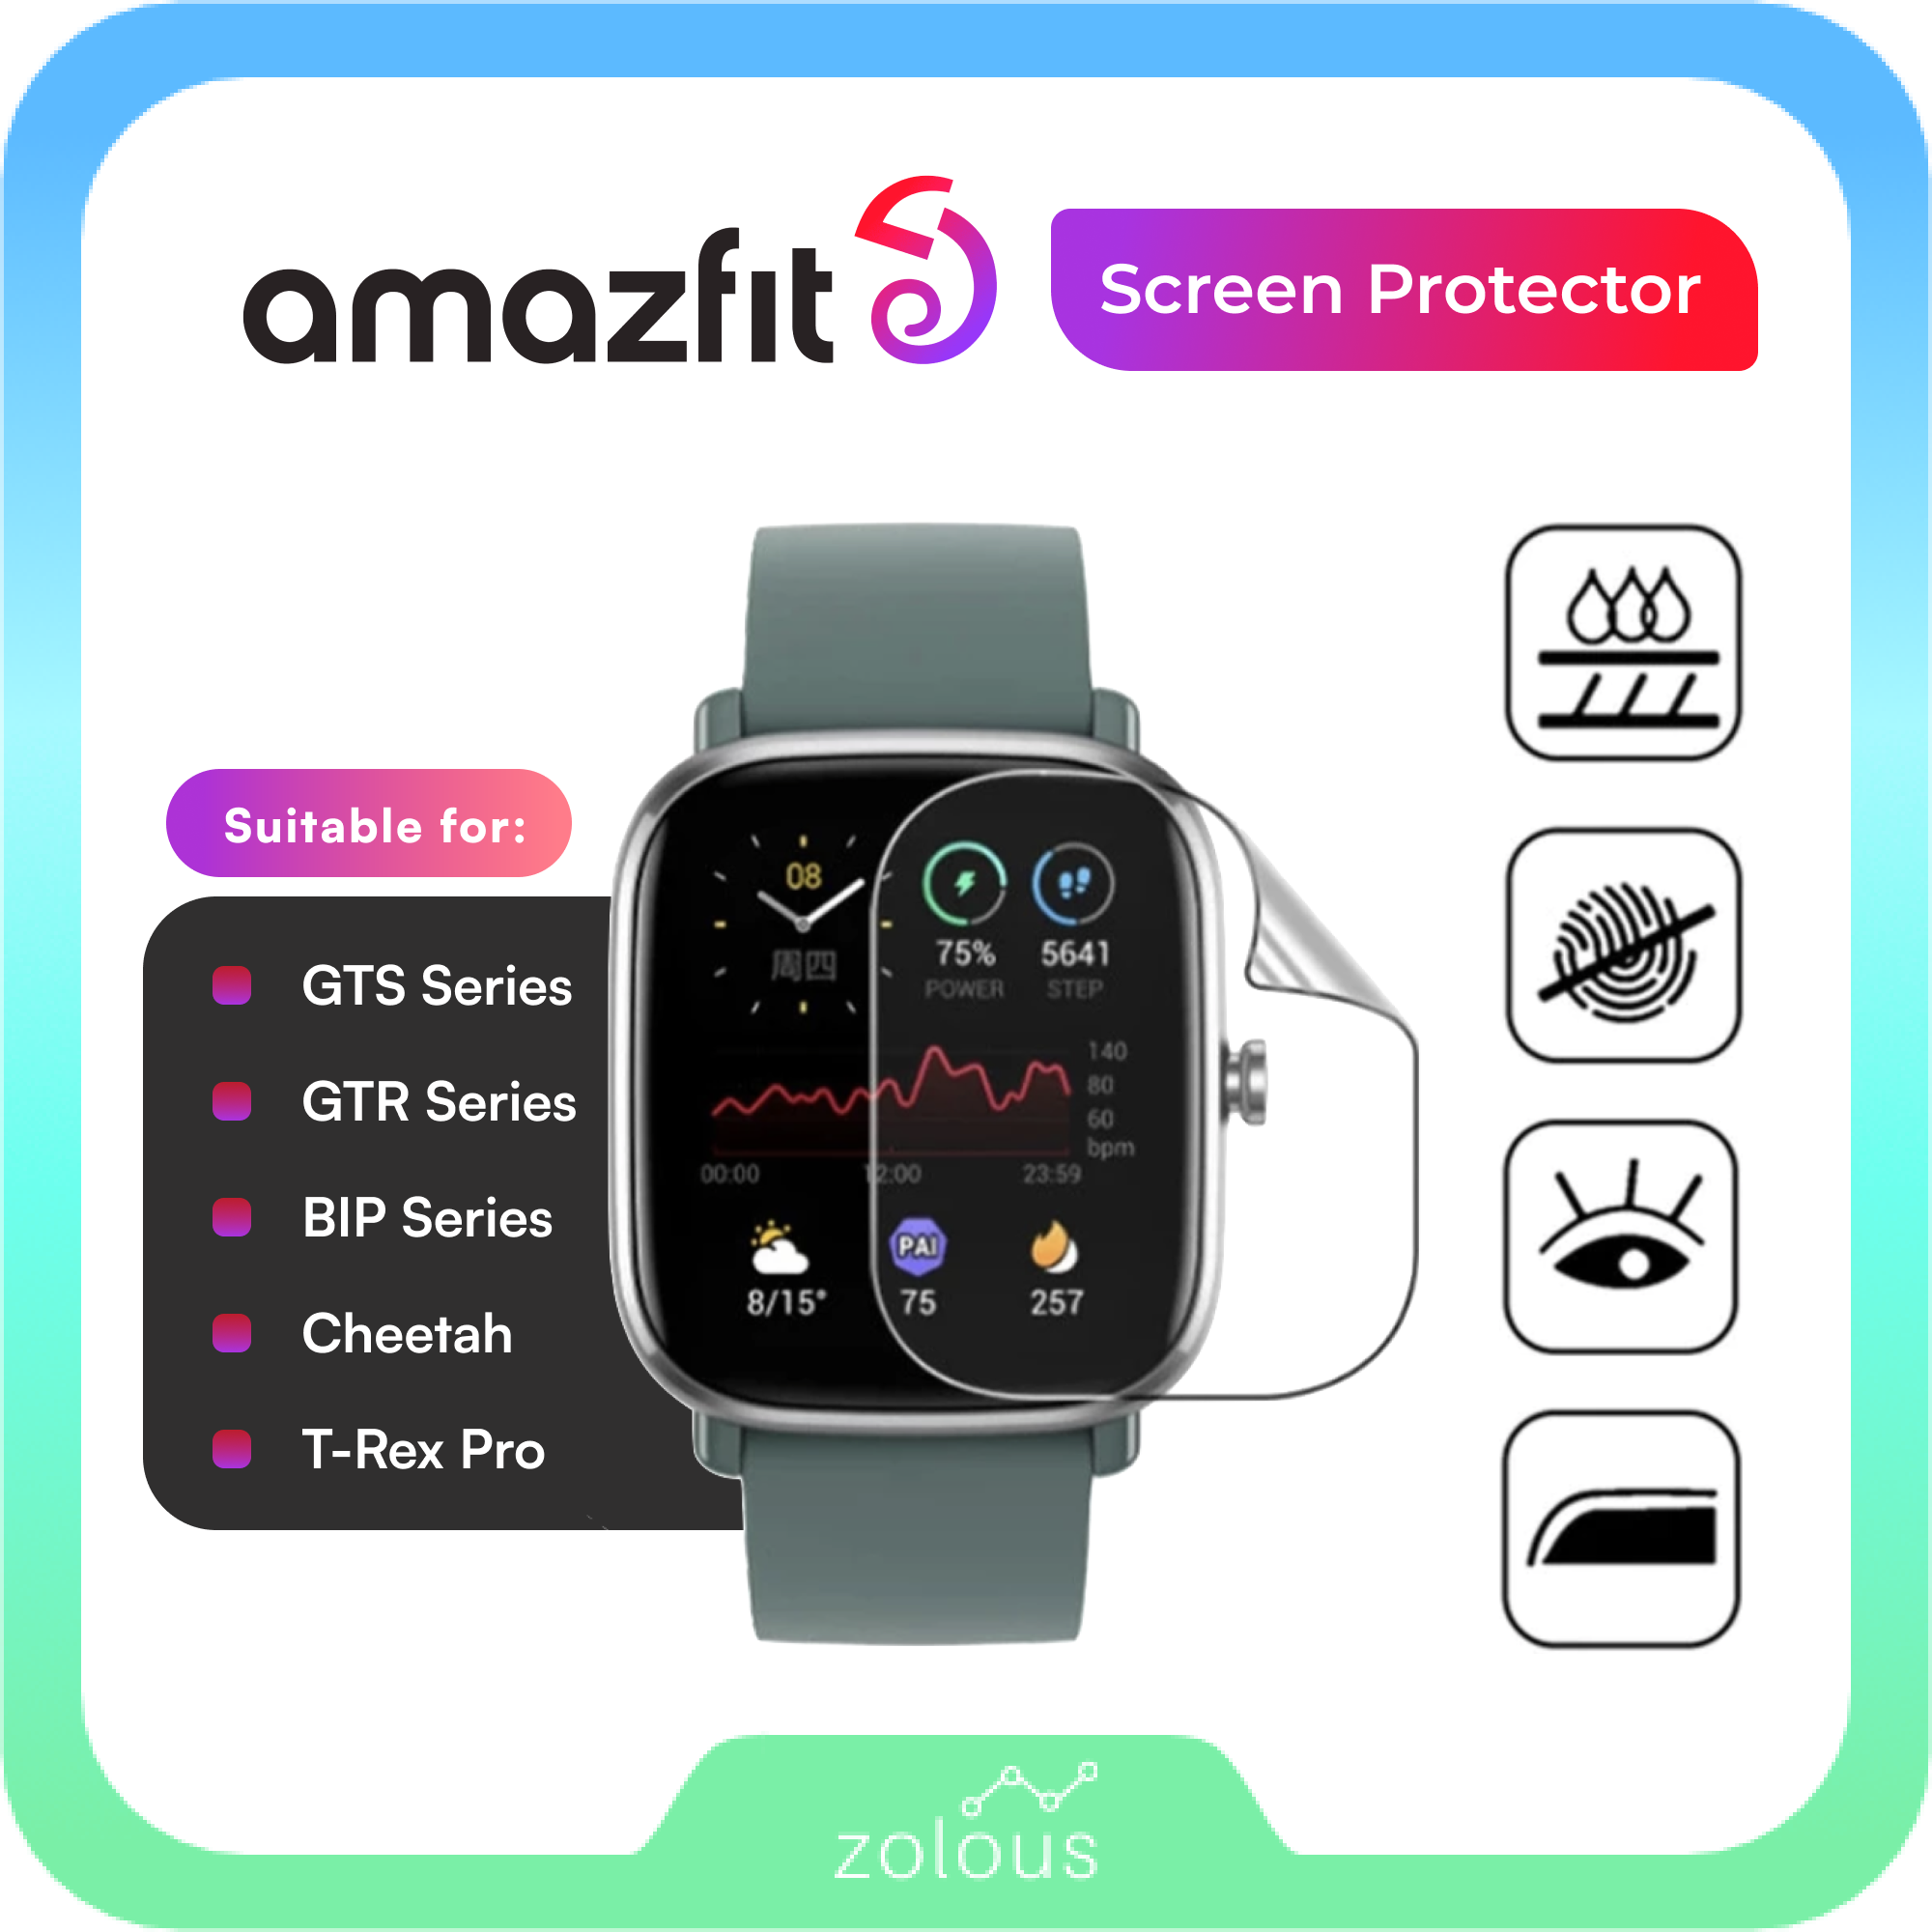 Amazfit Gts 4 Screen Protector - Scratch-resistant Soft Film For All Models